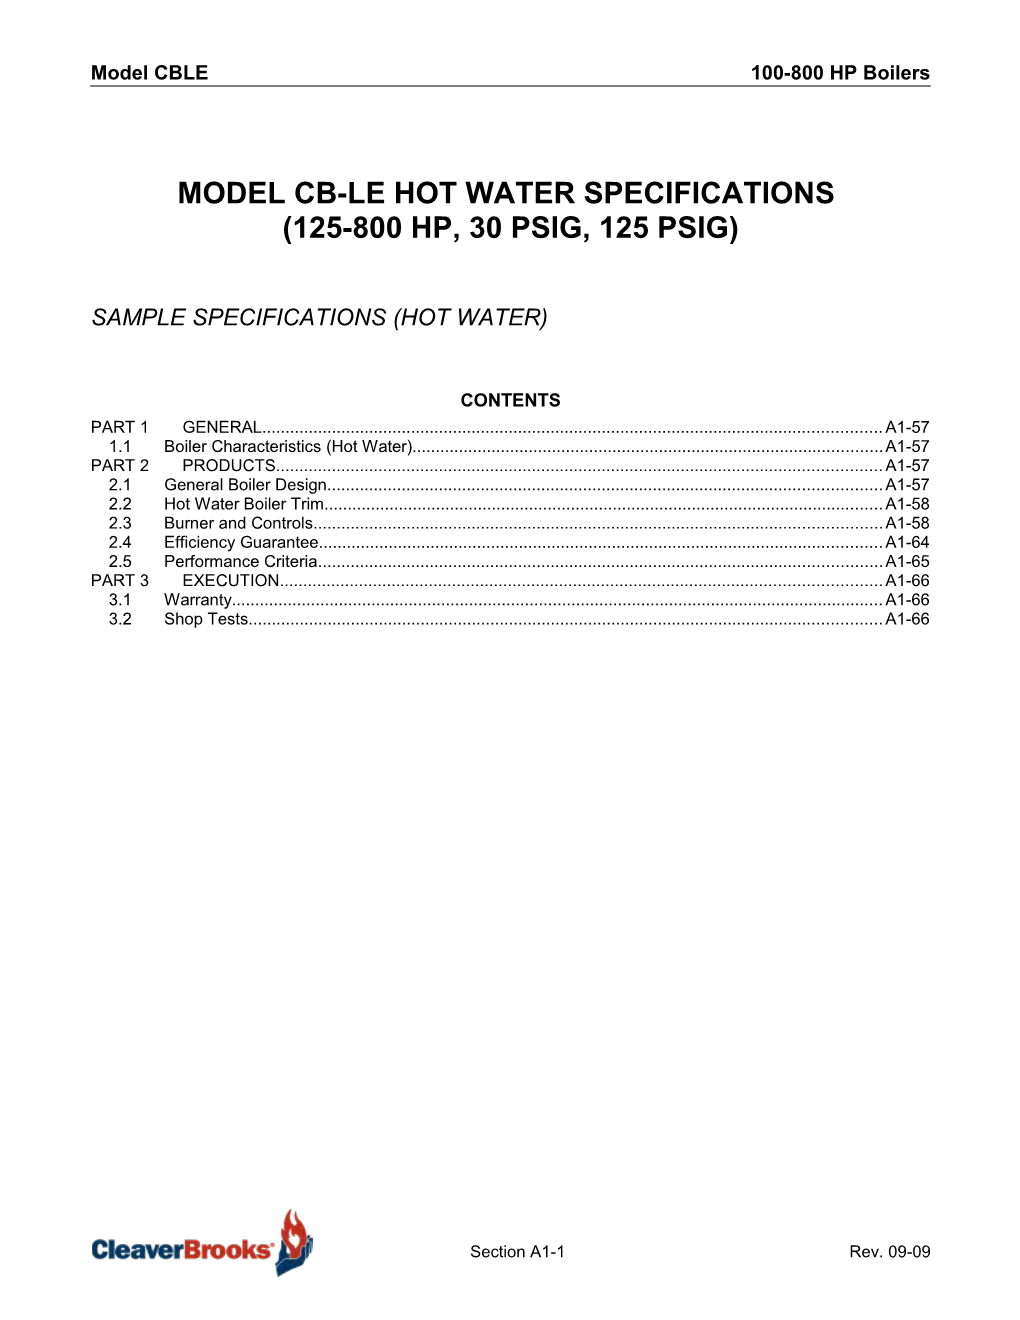 CBLE Specifications - Hot Water